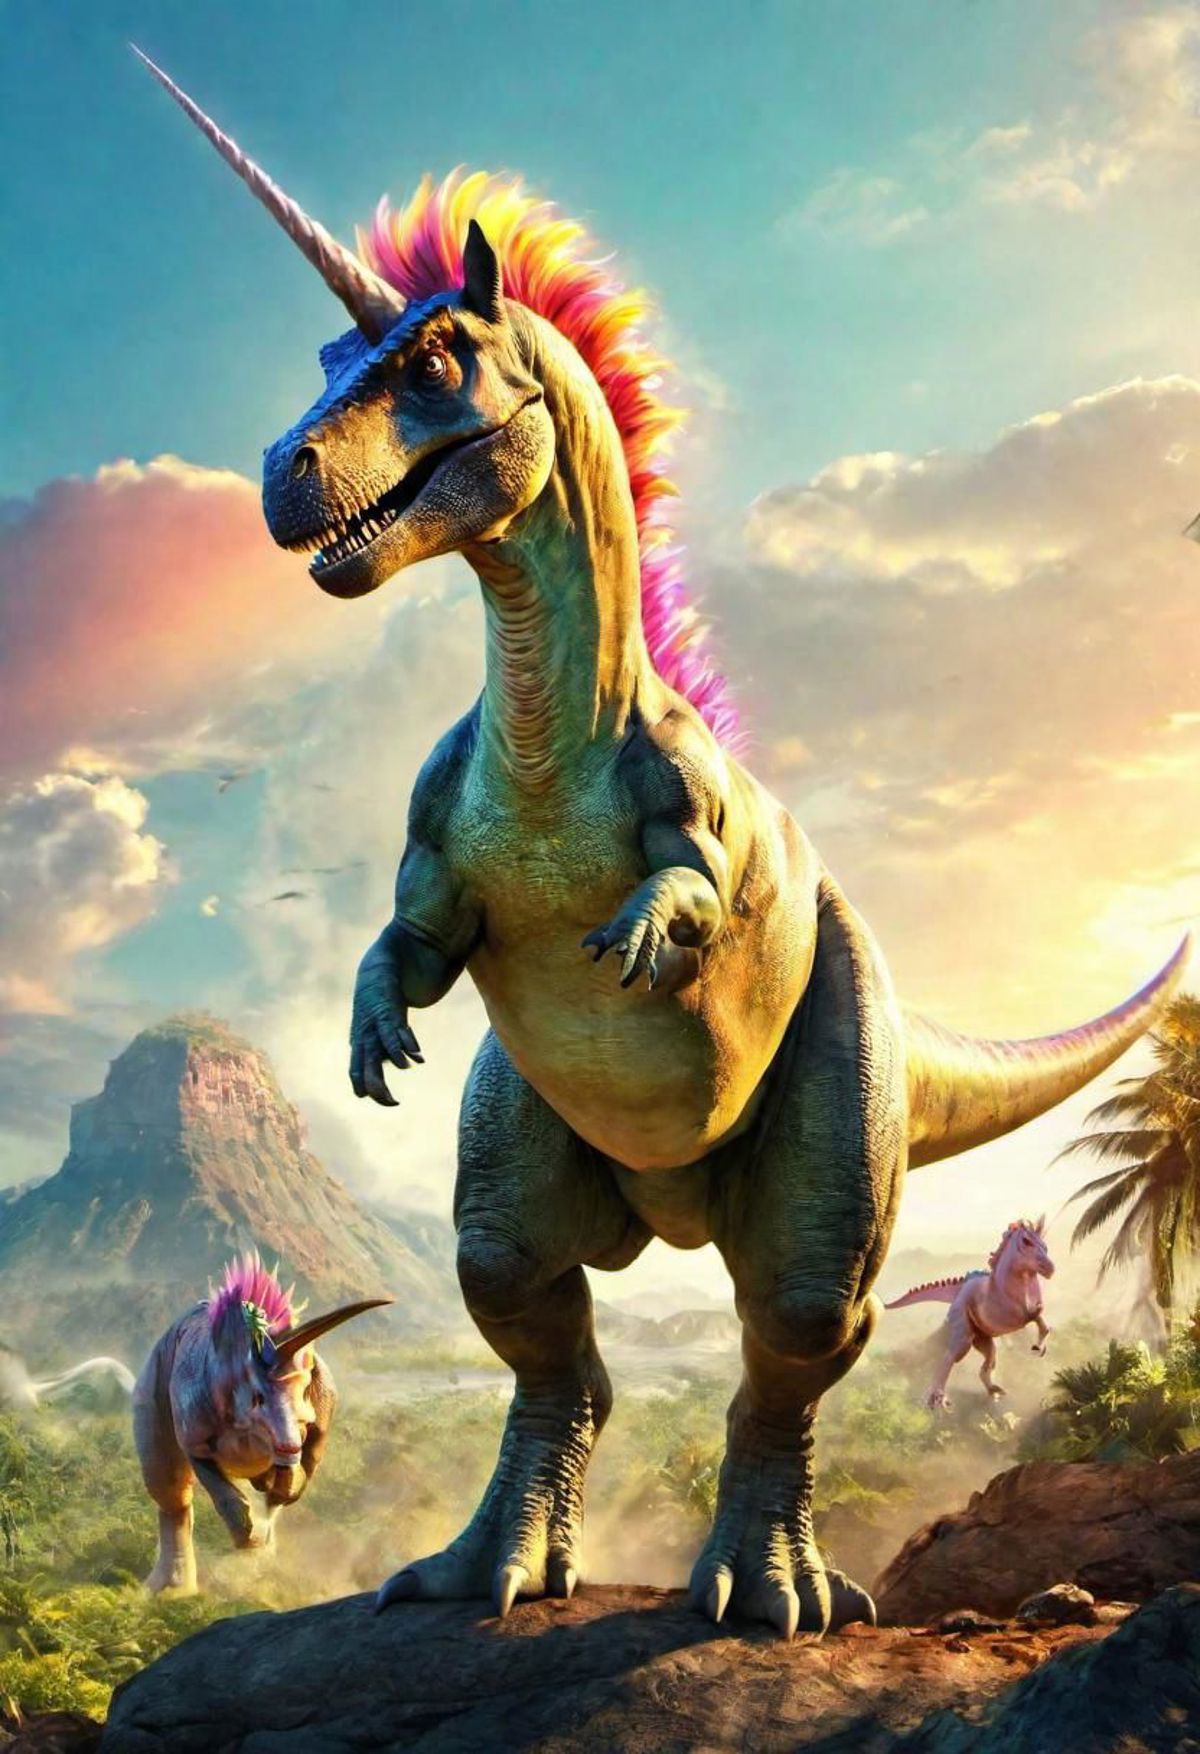 A vibrant, colorful, and animated depiction of a large, green dinosaur with a pink and blue mane and horns, walking on top of a rocky terrain. The dinosaur has a spiked tail and a few birds flying in the background.